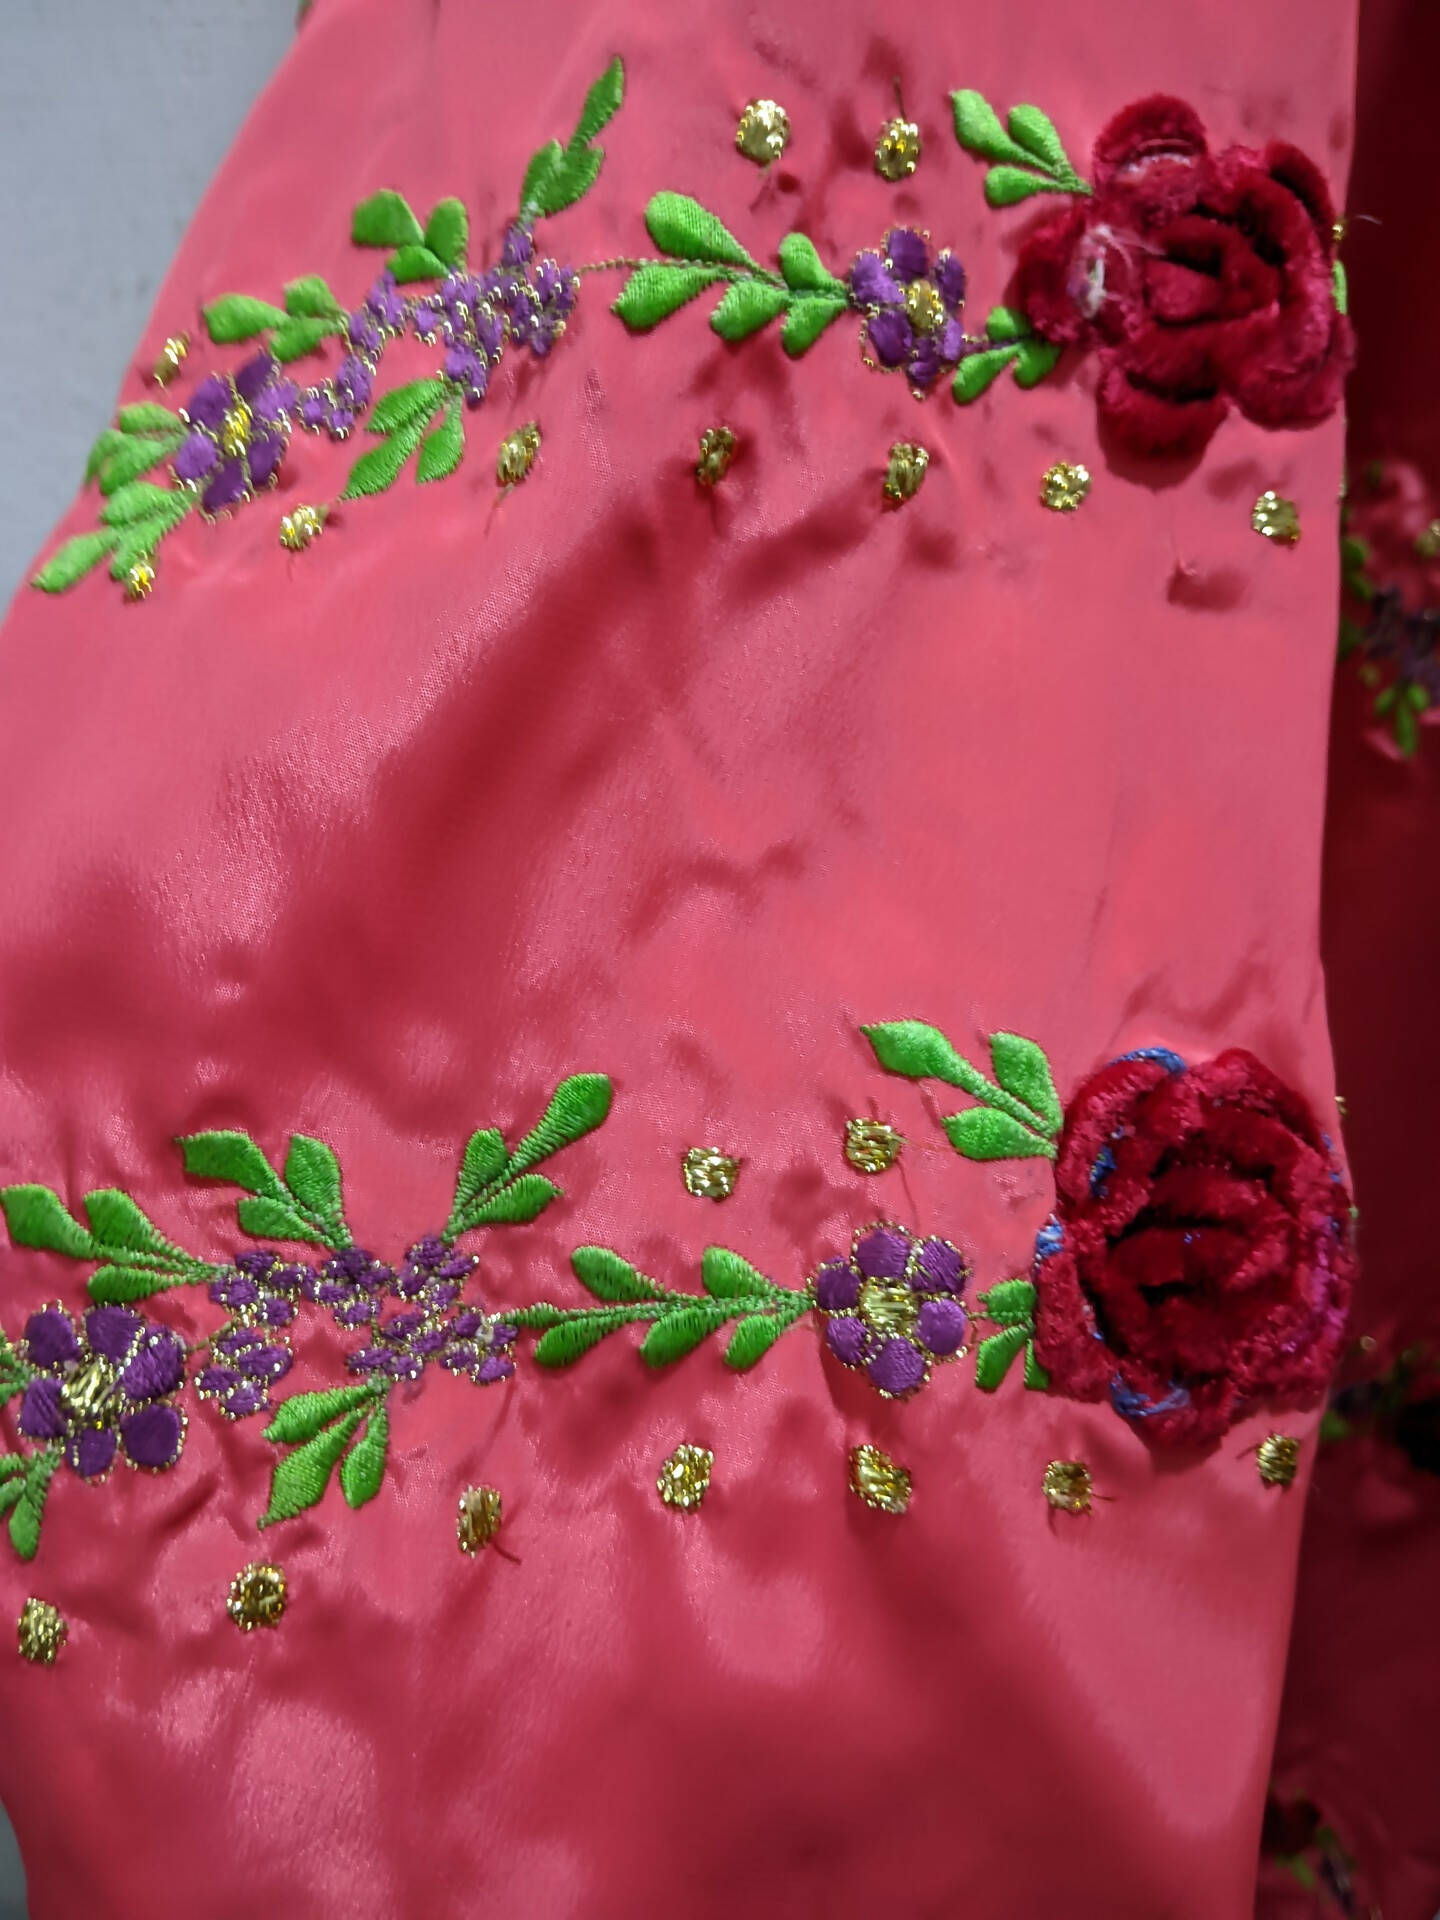 Pink Heavy Embroidered Dress (Size: M ) | Women Formals | Worn Once